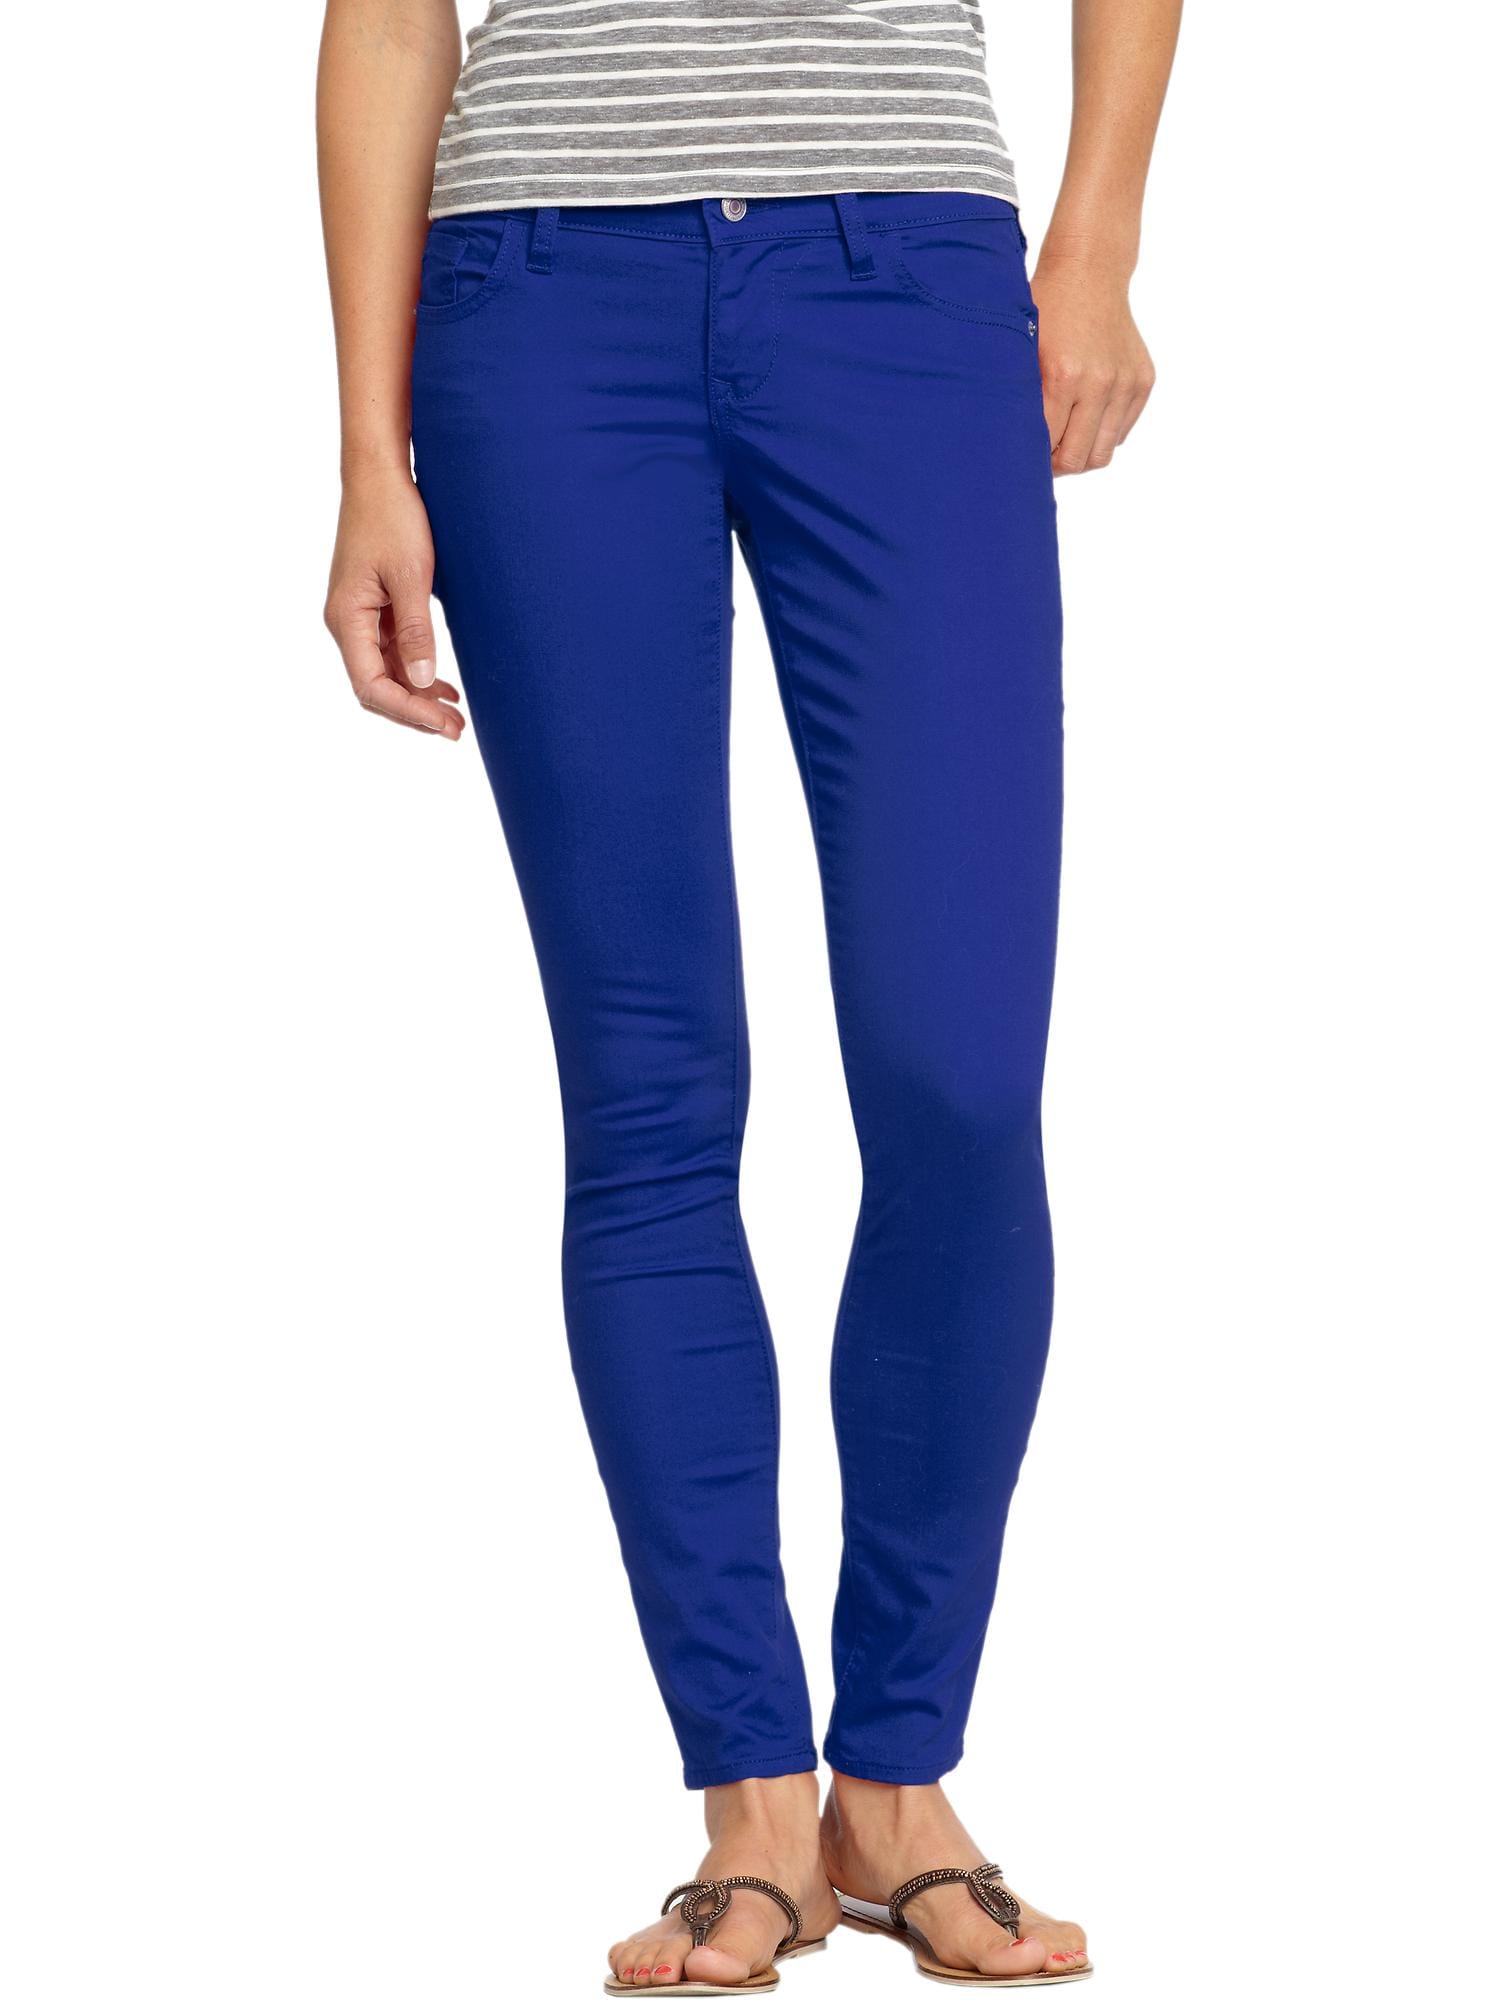 Low-Rise Rockstar Super Skinny Jeans for Women | Old Navy